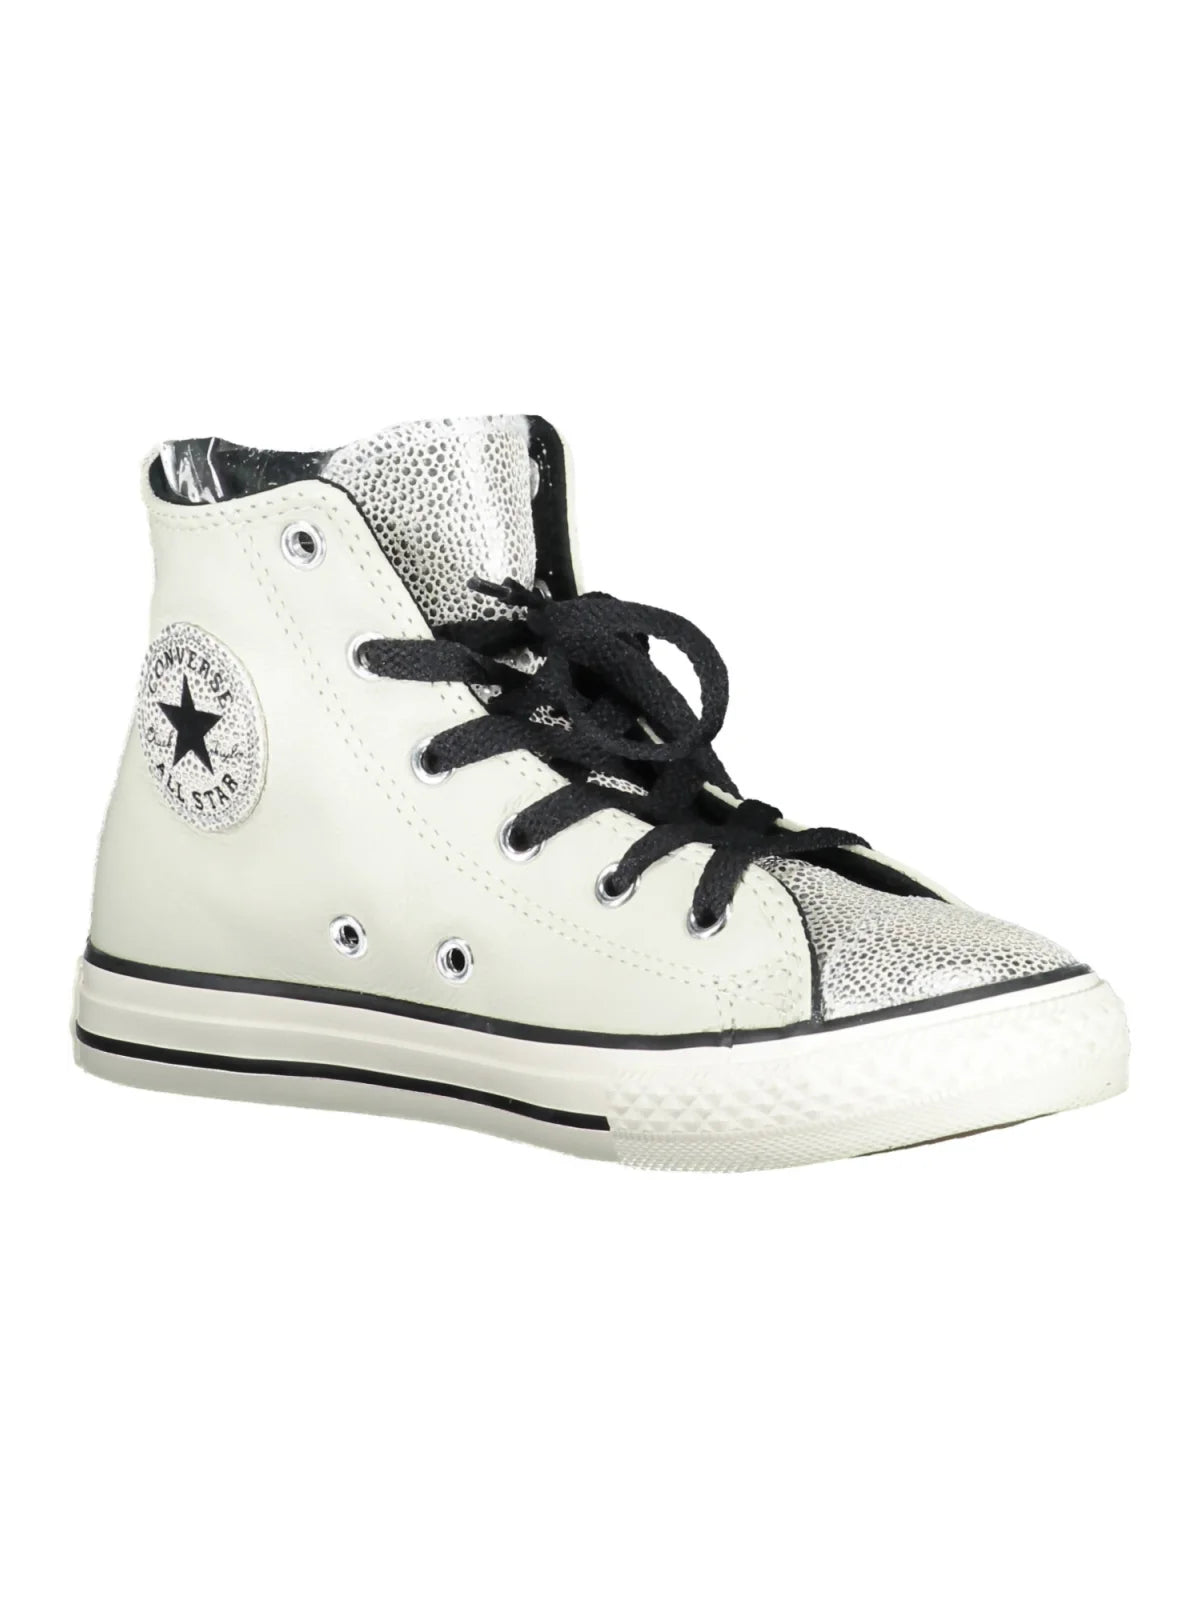 CONVERSE SPORTS SHOES FOR GIRLS SILVER-CONVERSE-SILVER-28-Urbanheer